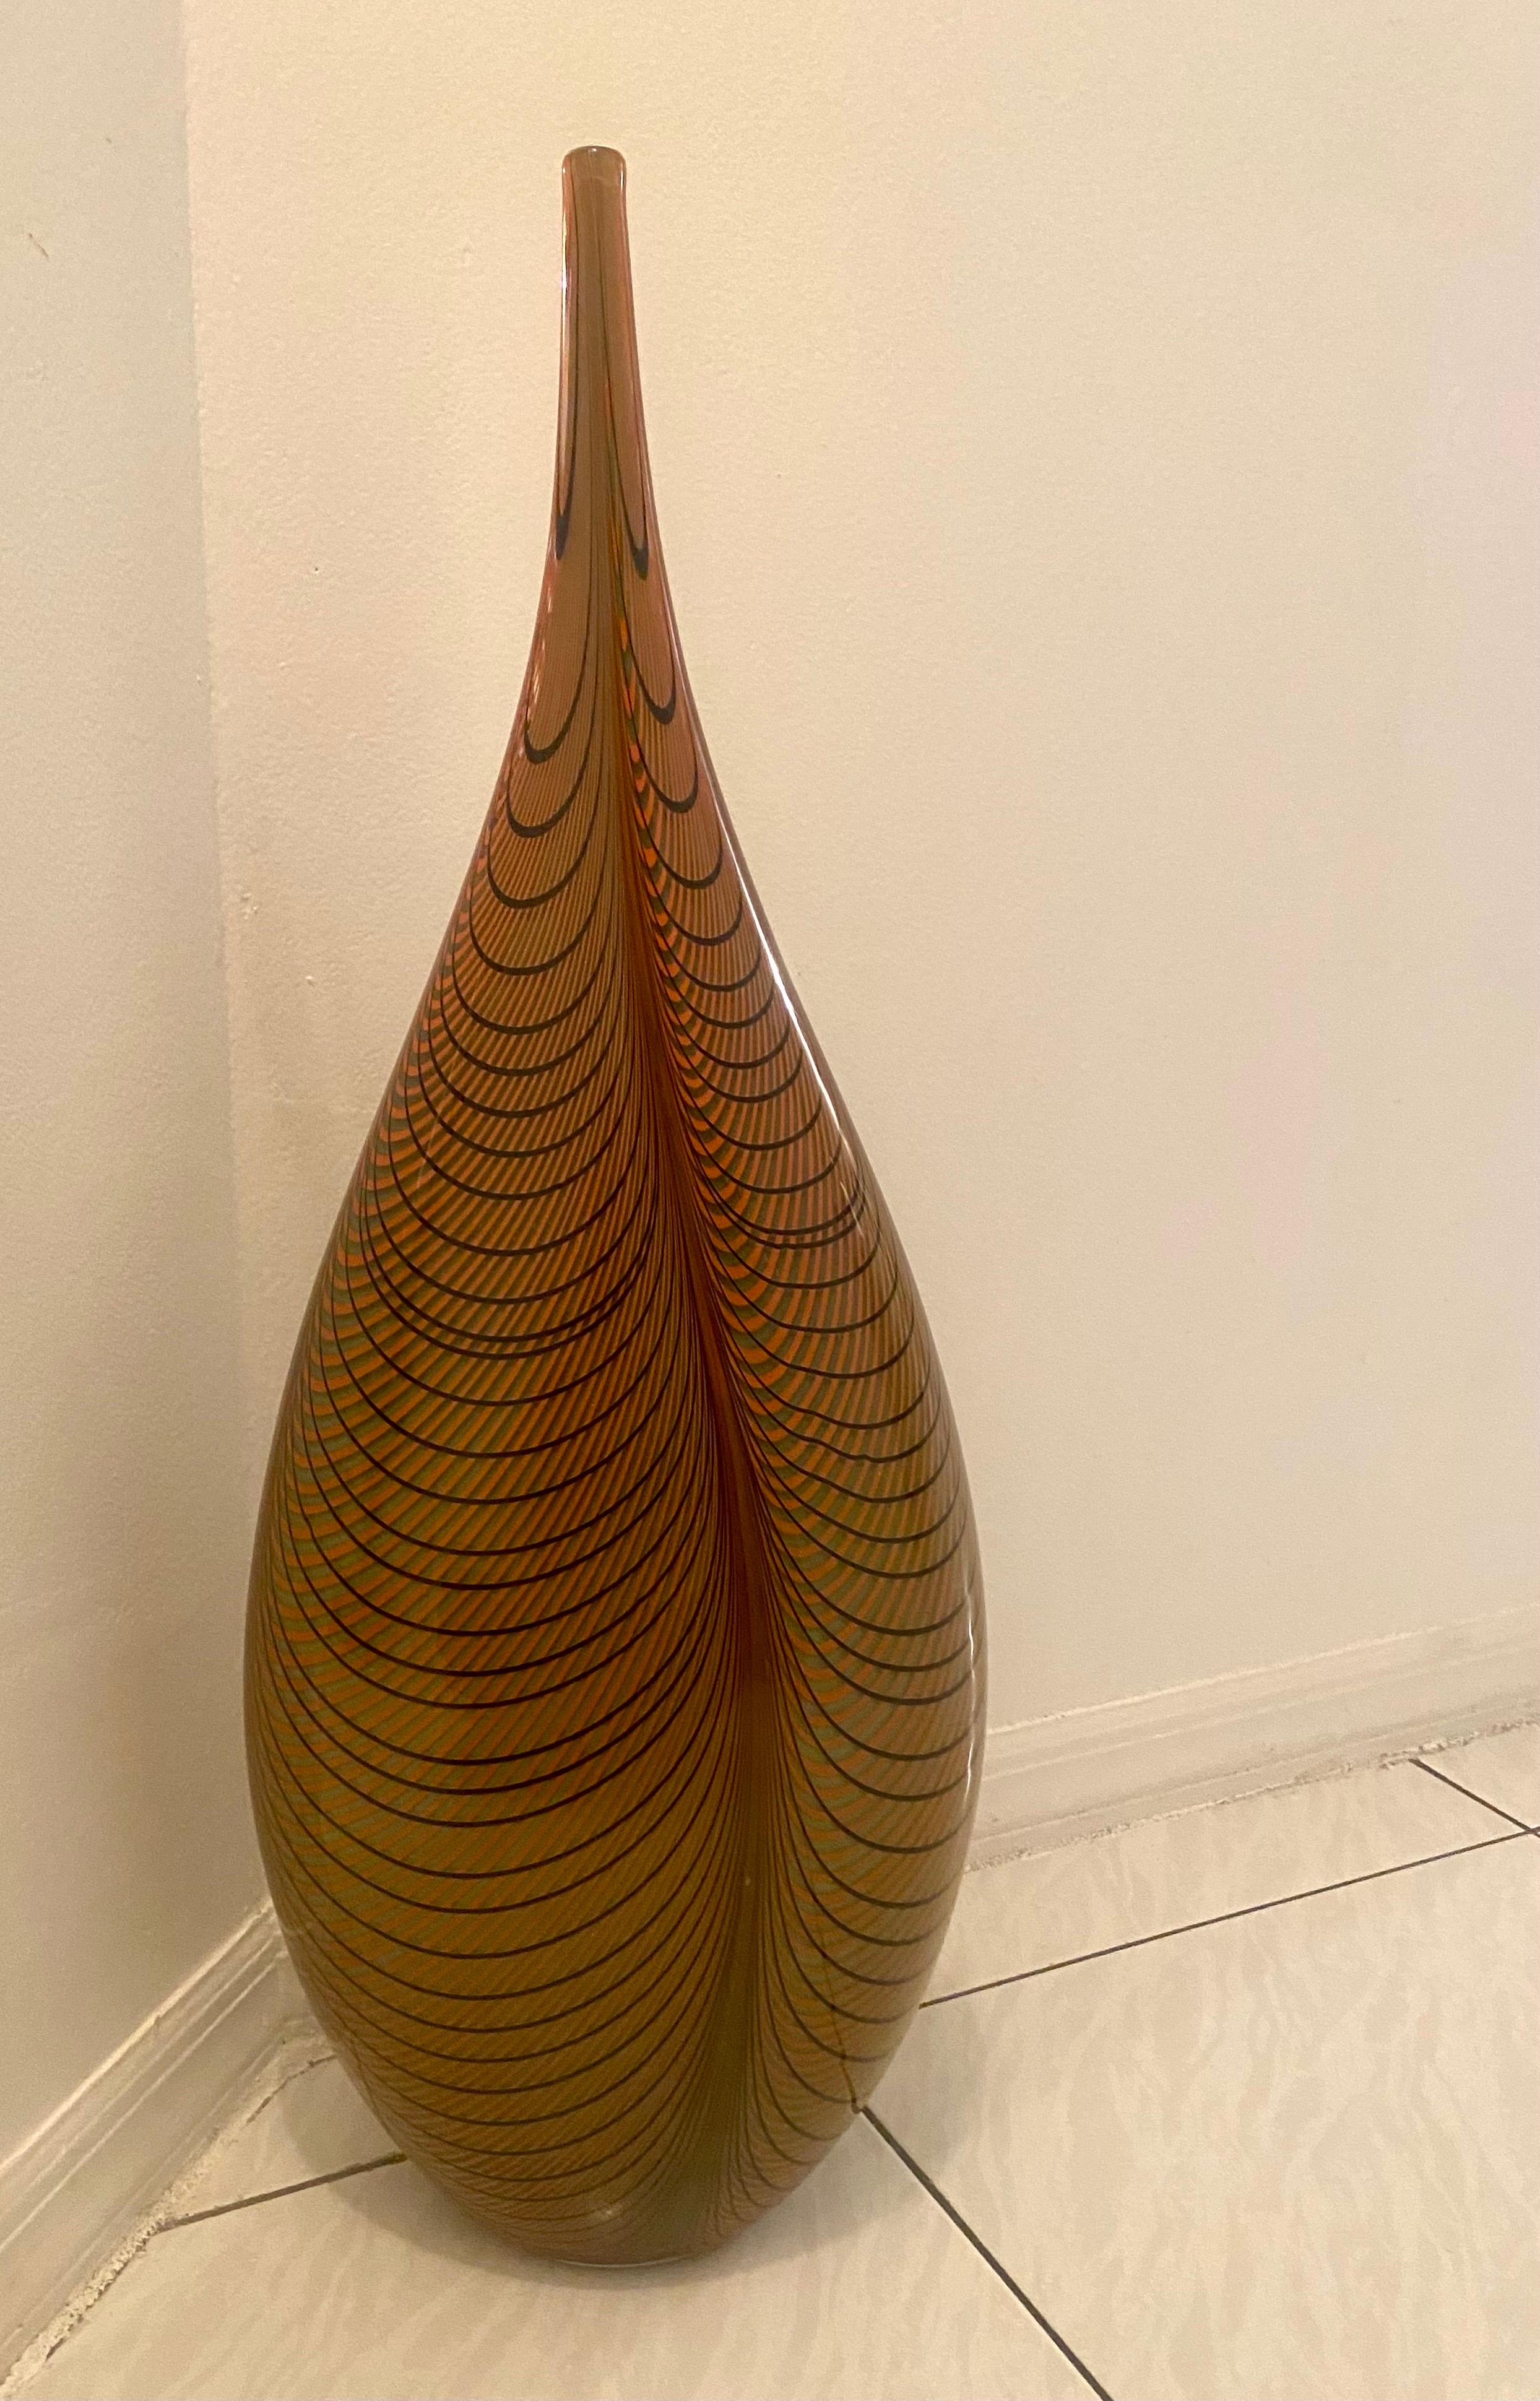 Blown Glass Alberto Dona Tall Feather Murano Glass Vase, Signed For Sale